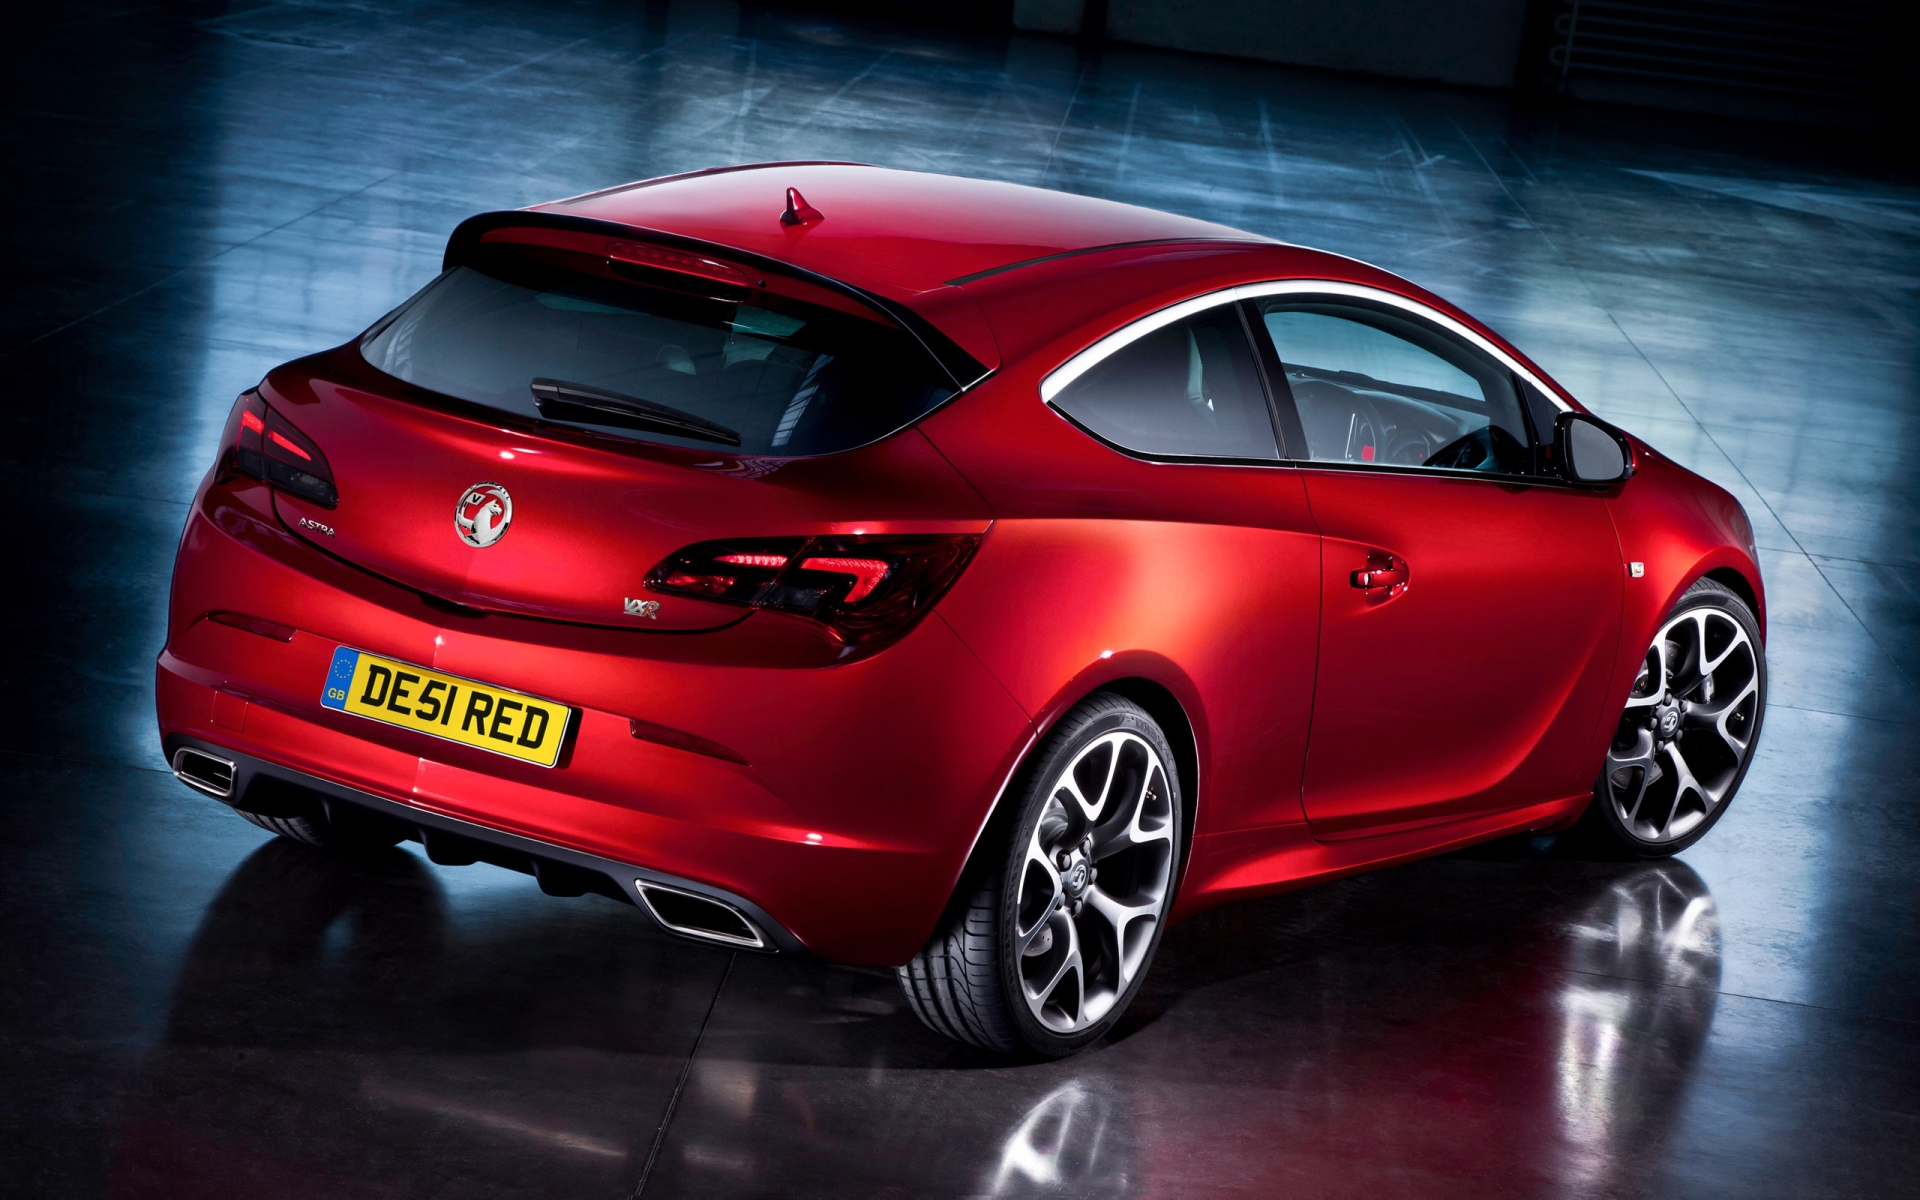 Vauxhall Astra GTC Rear for 1920 x 1200 widescreen resolution